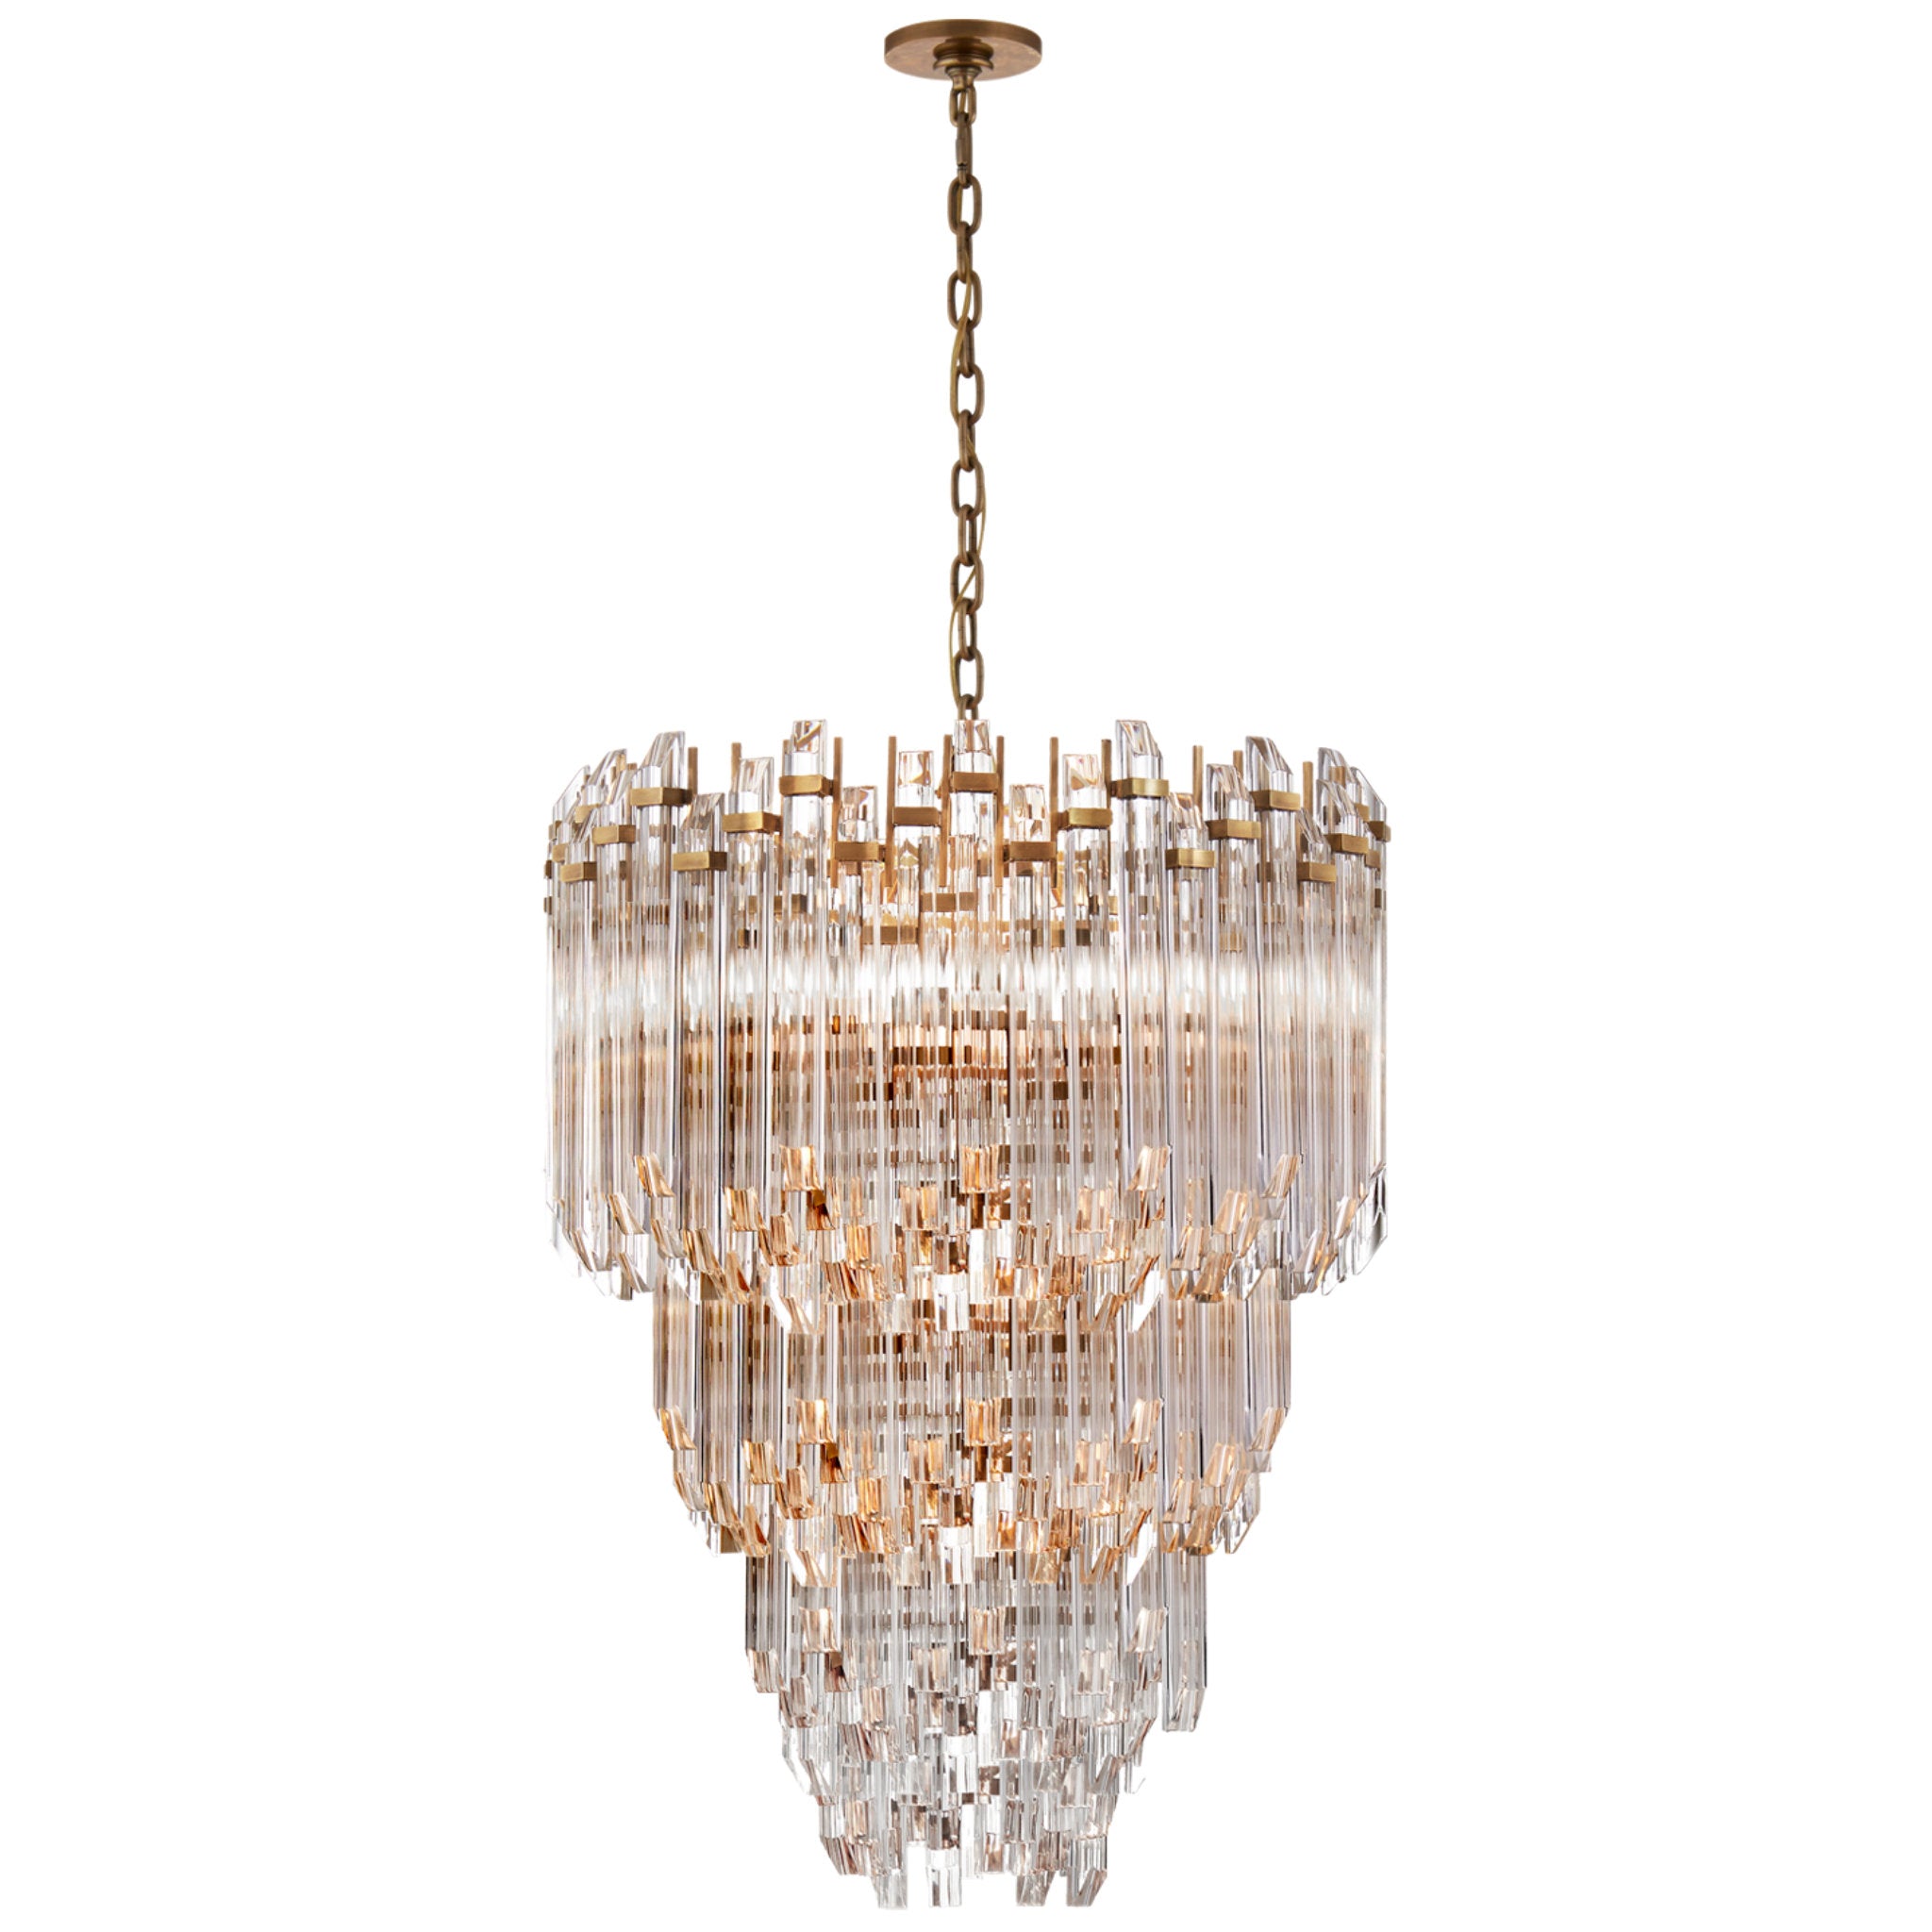 Suzanne Kasler Adele Three-Tier Waterfall Chandelier in Hand-Rubbed Antique Brass with Clear Acrylic